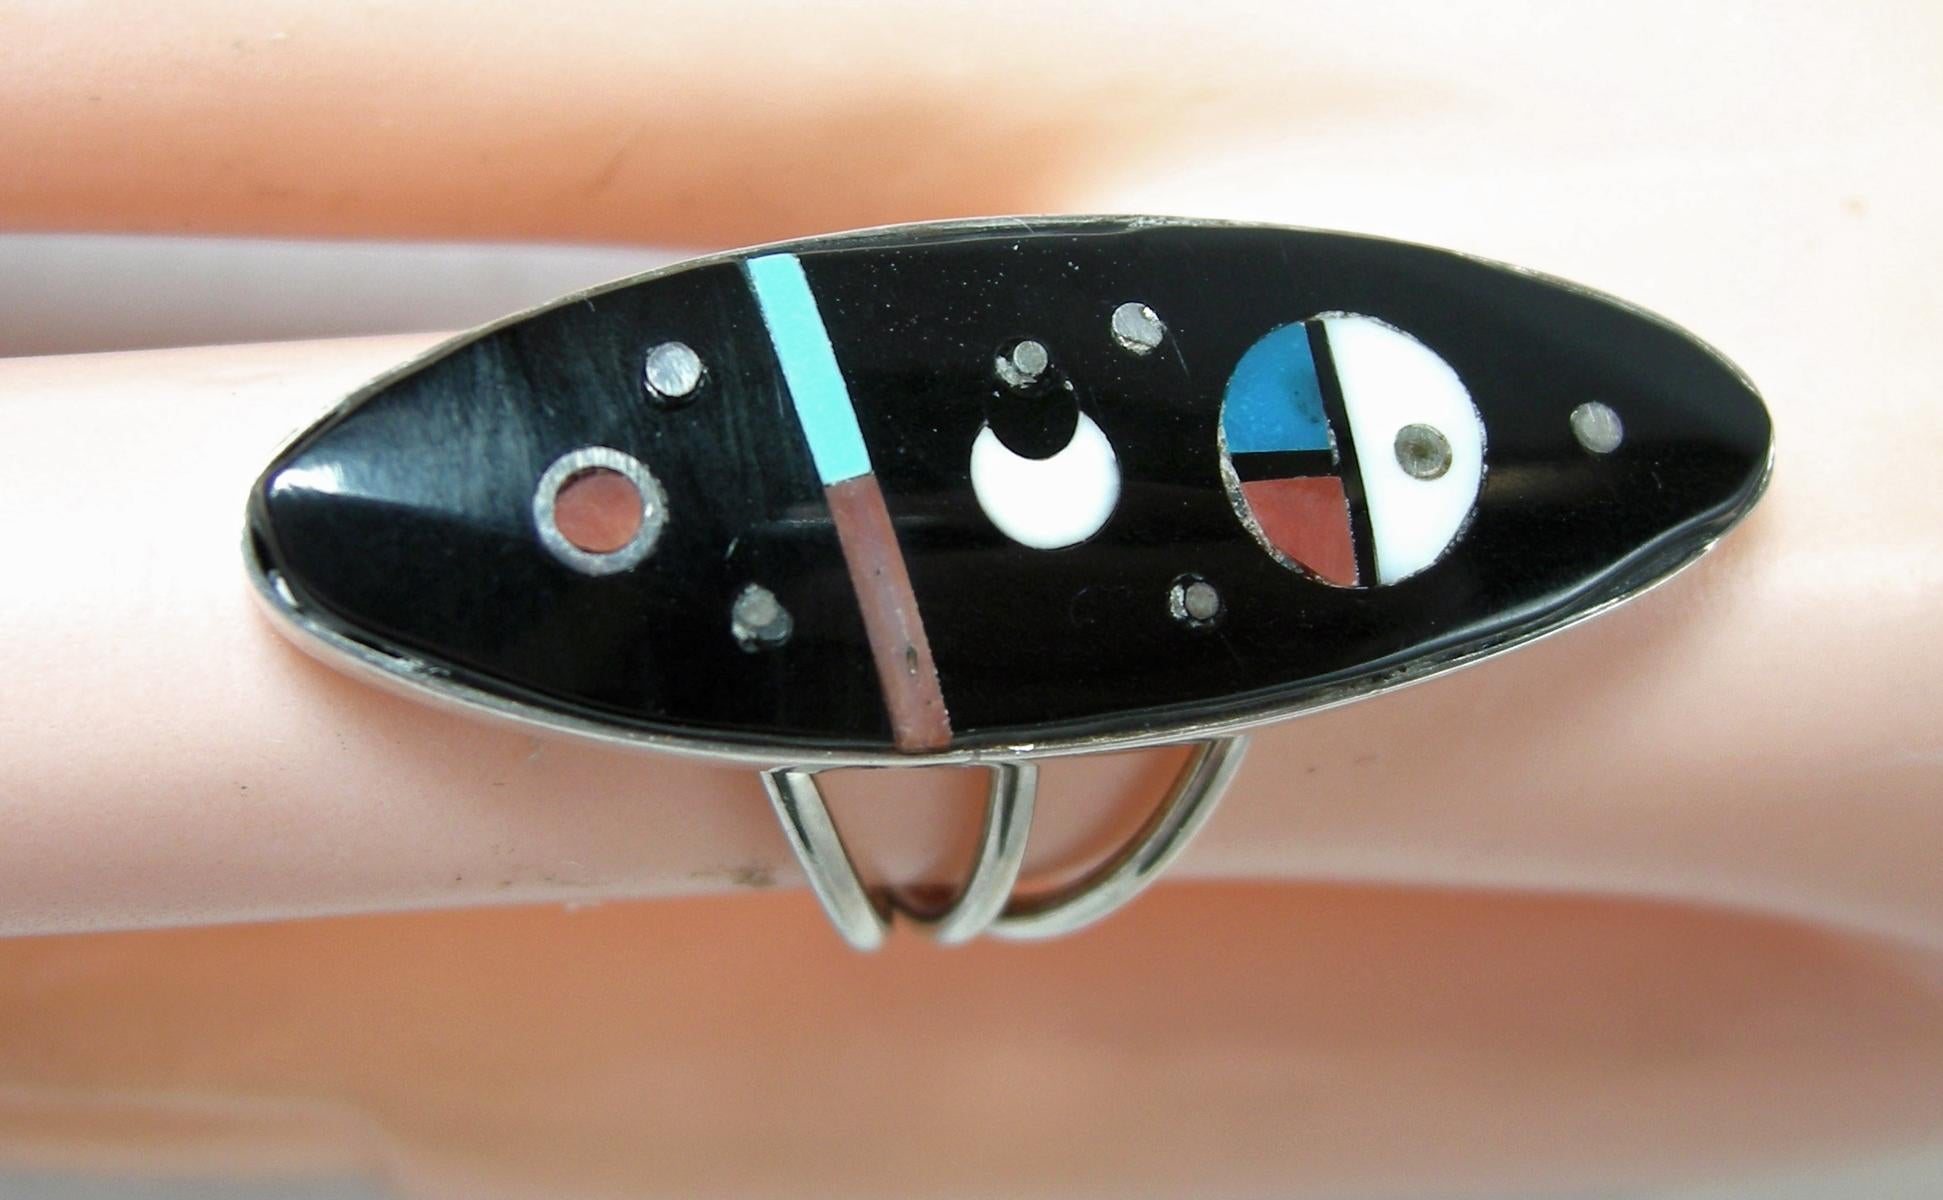 This vintage signed H. Smith elongated ring has an onyx stone with inlay of turquoise, coral and Mother of Pearl in sterling silver.  It’s a size 6-1/2 and measures 1-1/2” x 1/2” at the top. It’s signed “H. Smith” and is in excellent condition.